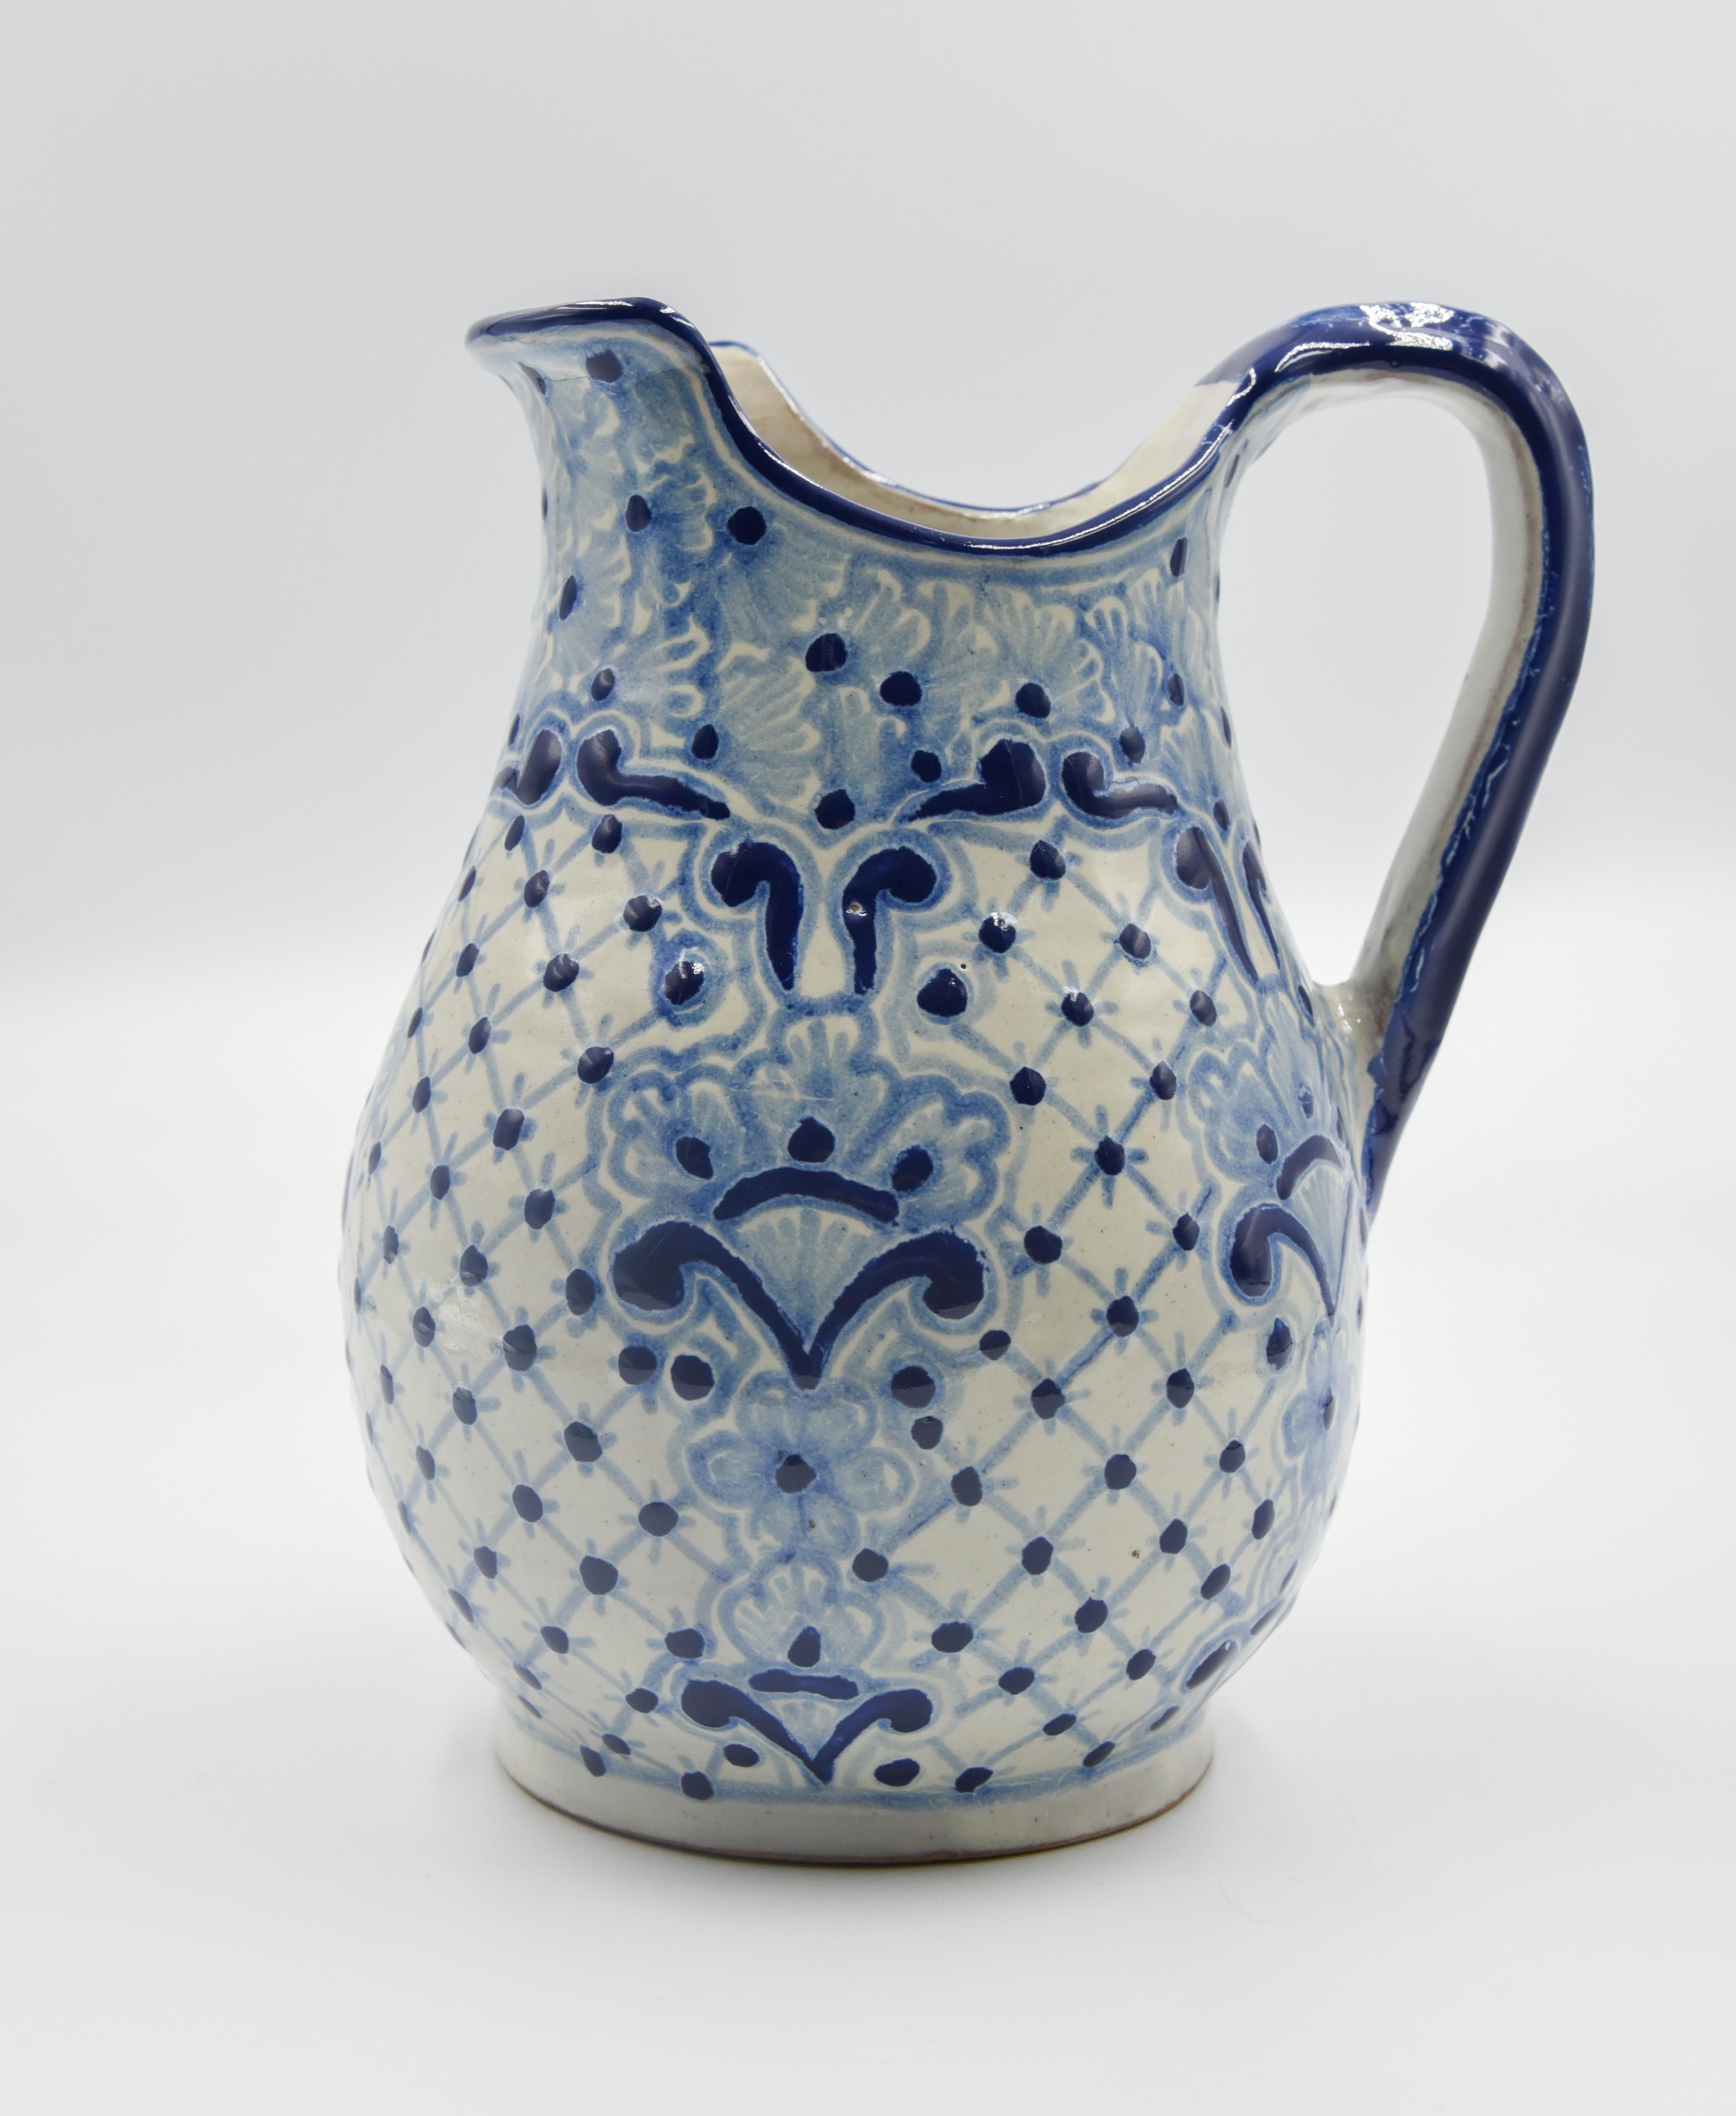 This majolica Talavera pitcher is perfect for a decorative piece or useful pitcher for the everyday life. Painted in a traditional poblano style (blue/ white) this beautiful vessel is perfect for the kitchen or dinning room. 

The Talavera is not